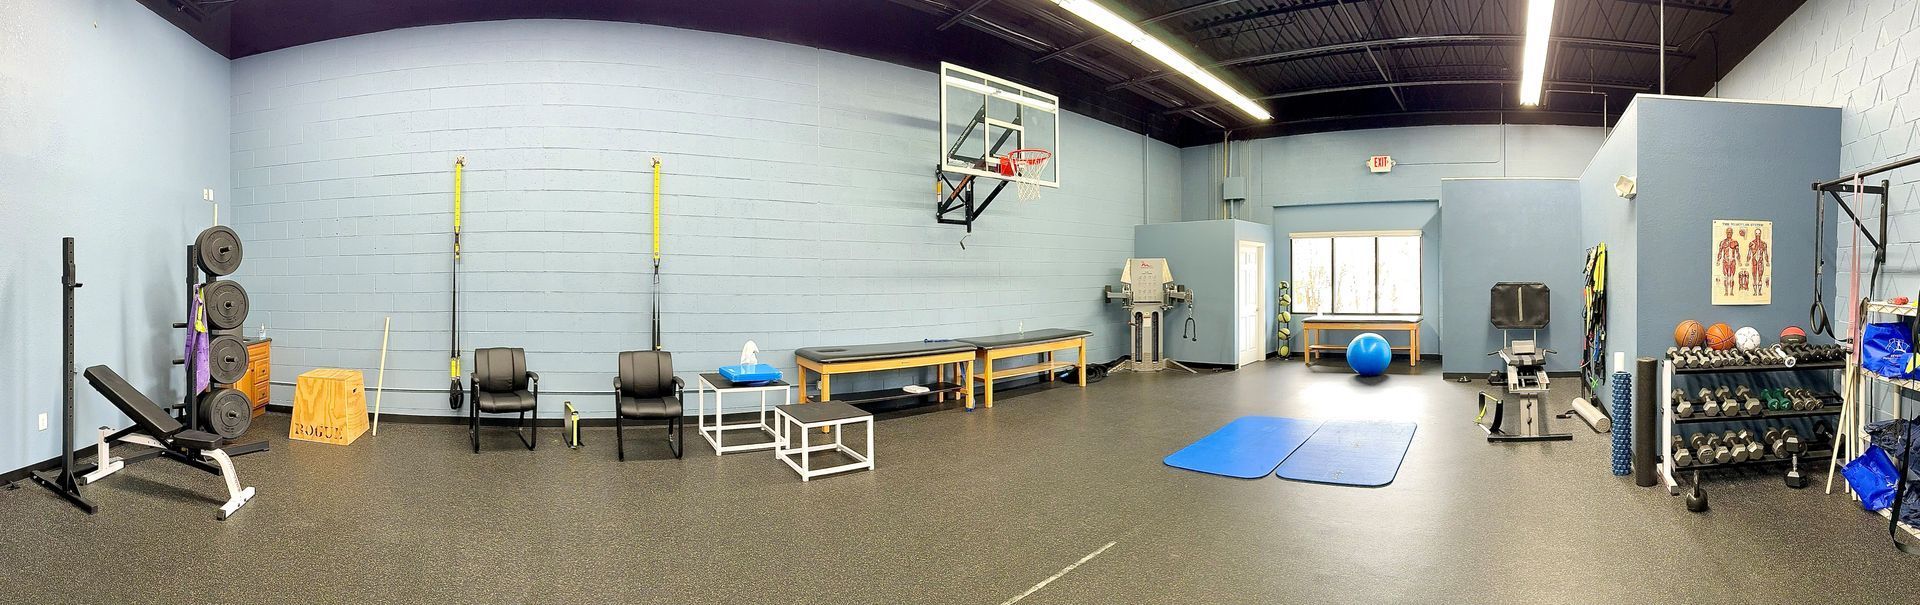 A panoramic view of a gym with a basketball hoop on the wall